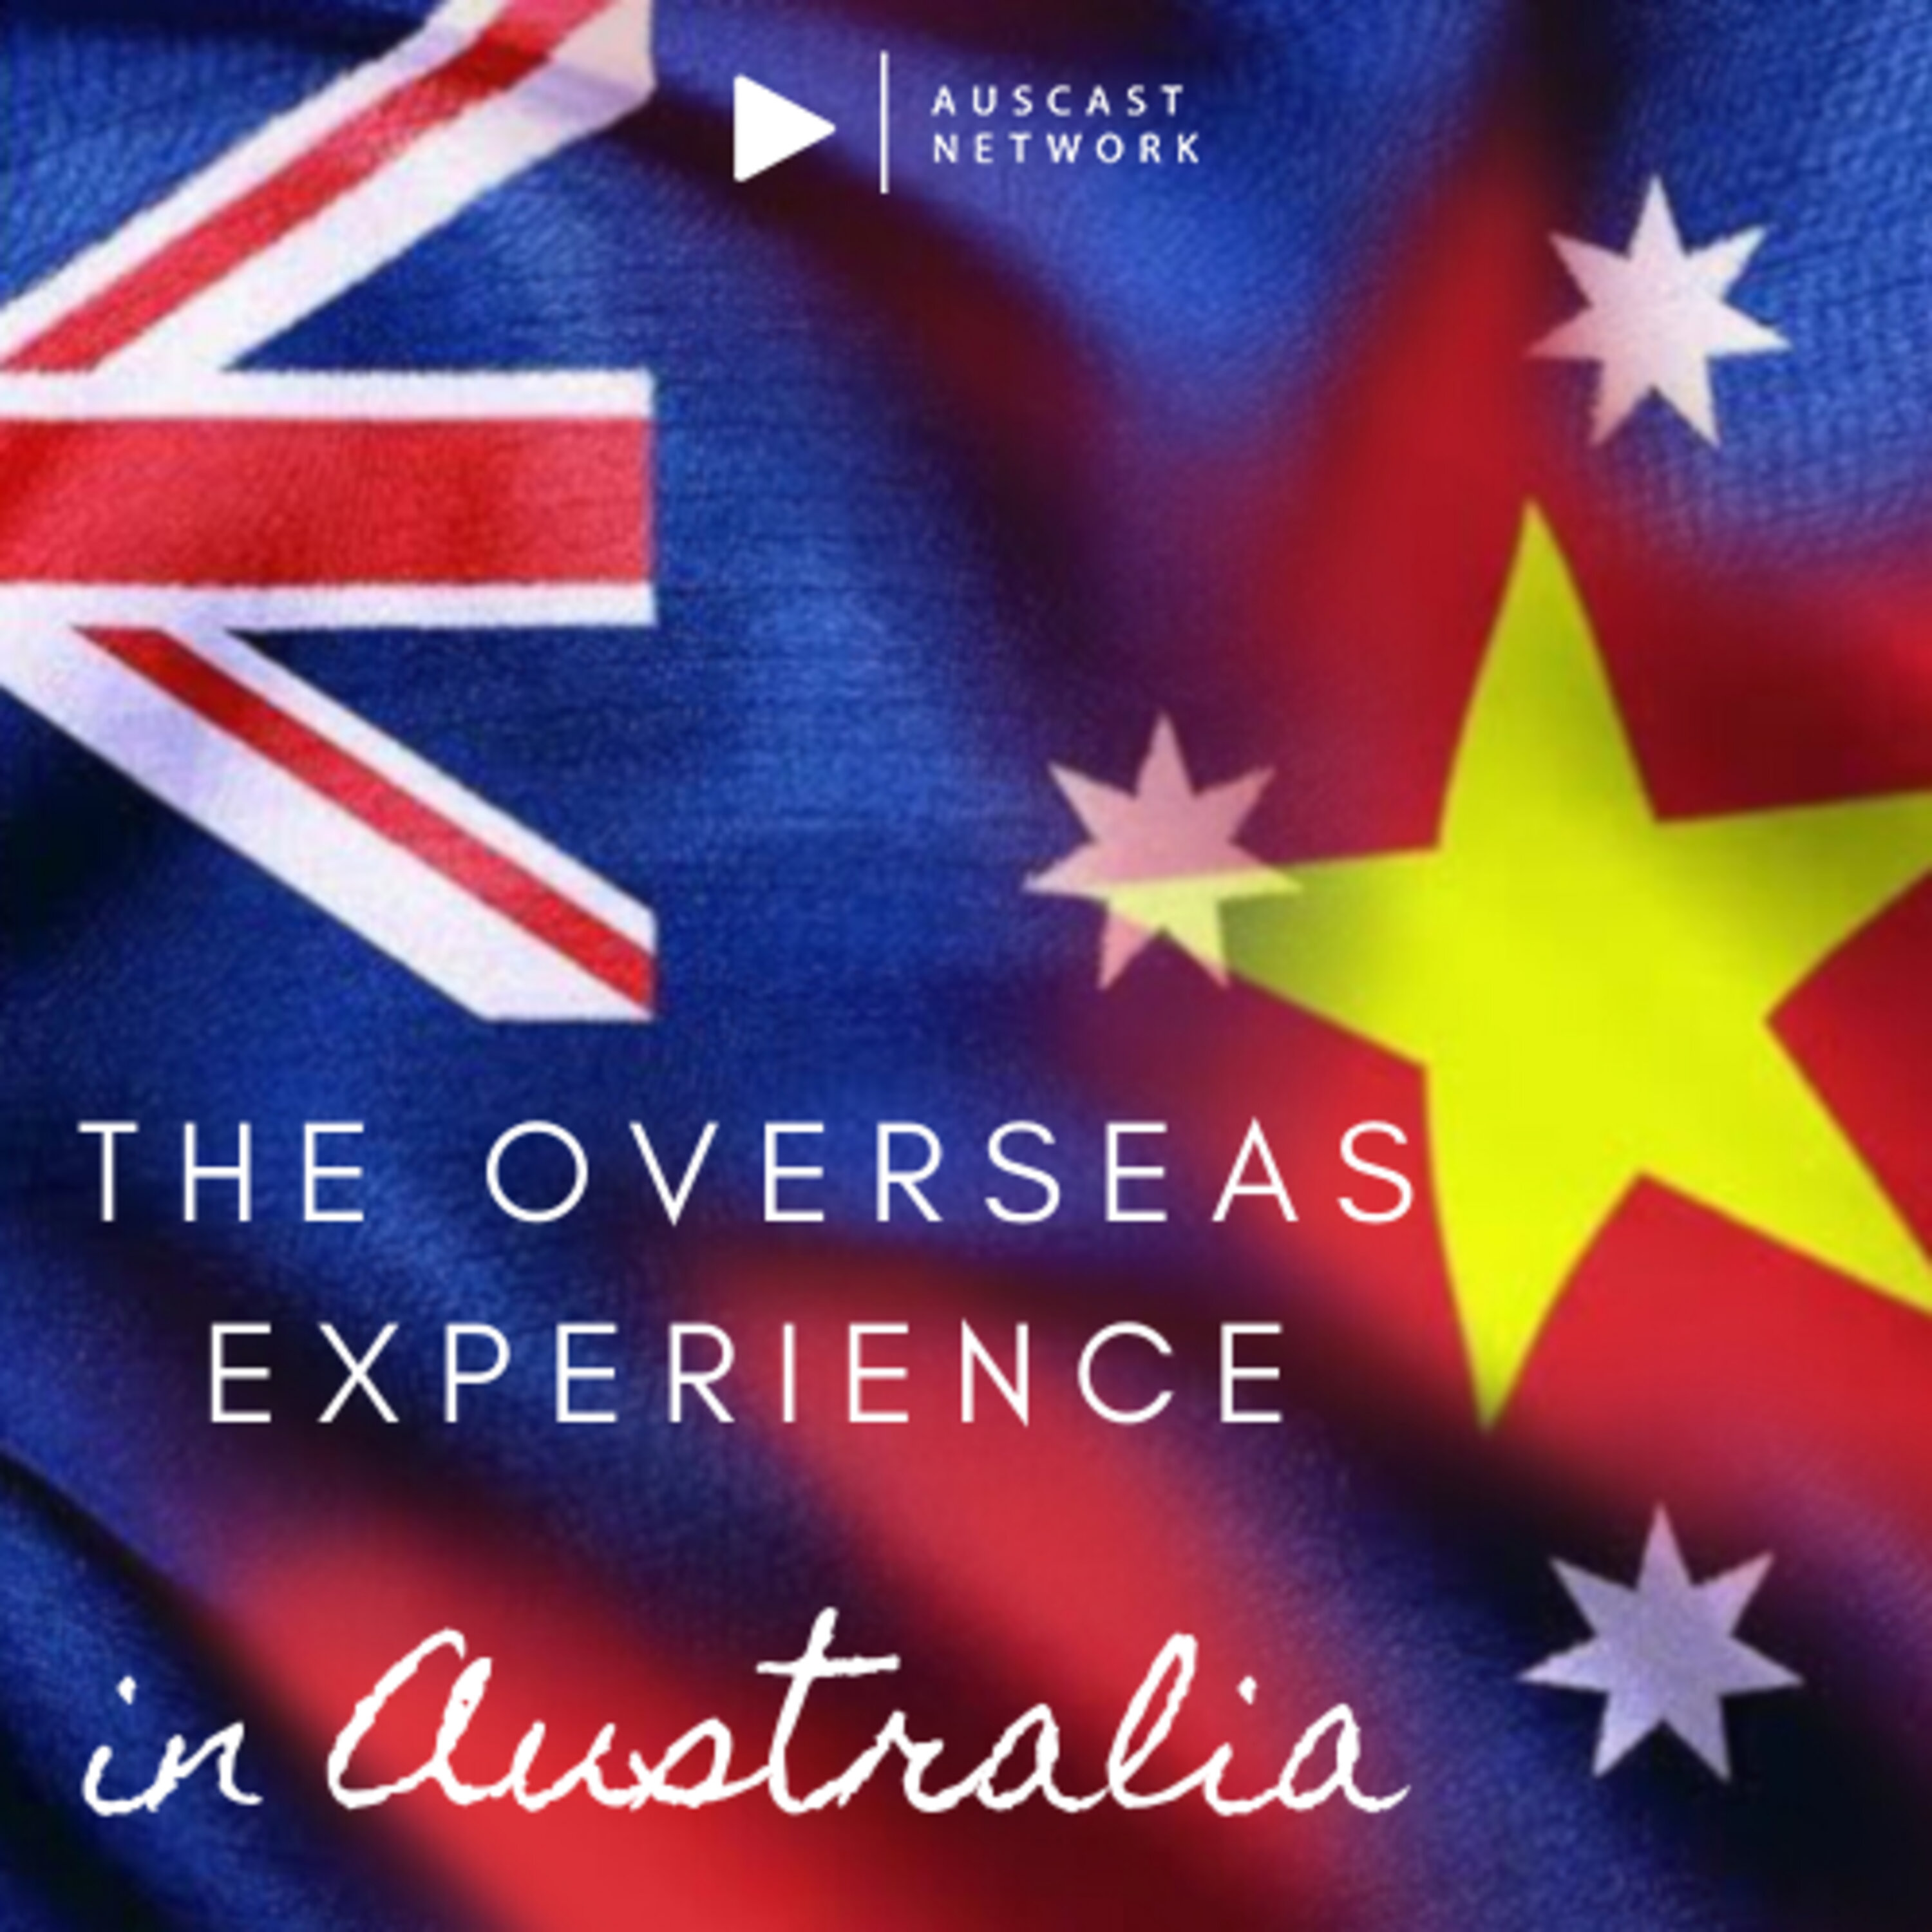 The Overseas Experience in Australia - Part 3